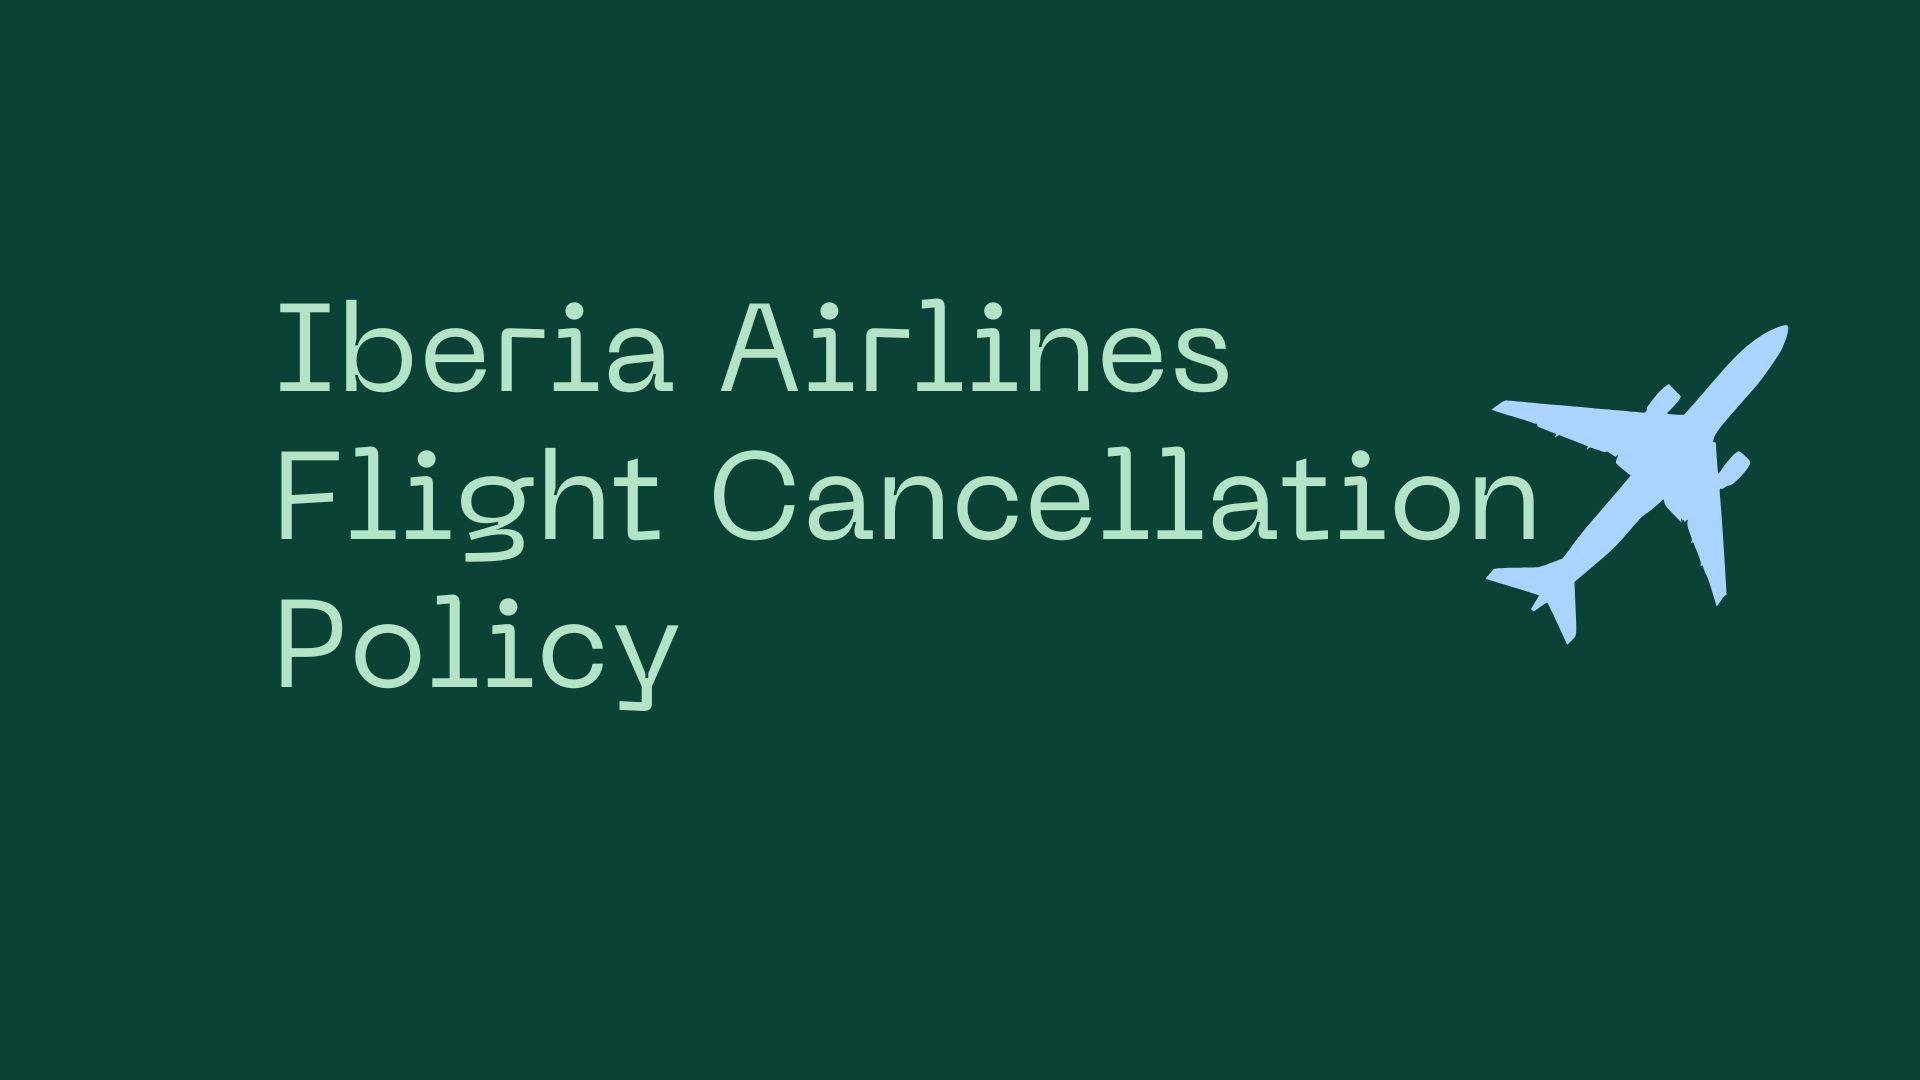 Iberia Airlines Flight Cancellation Policy643fb0713d8b8.jpg